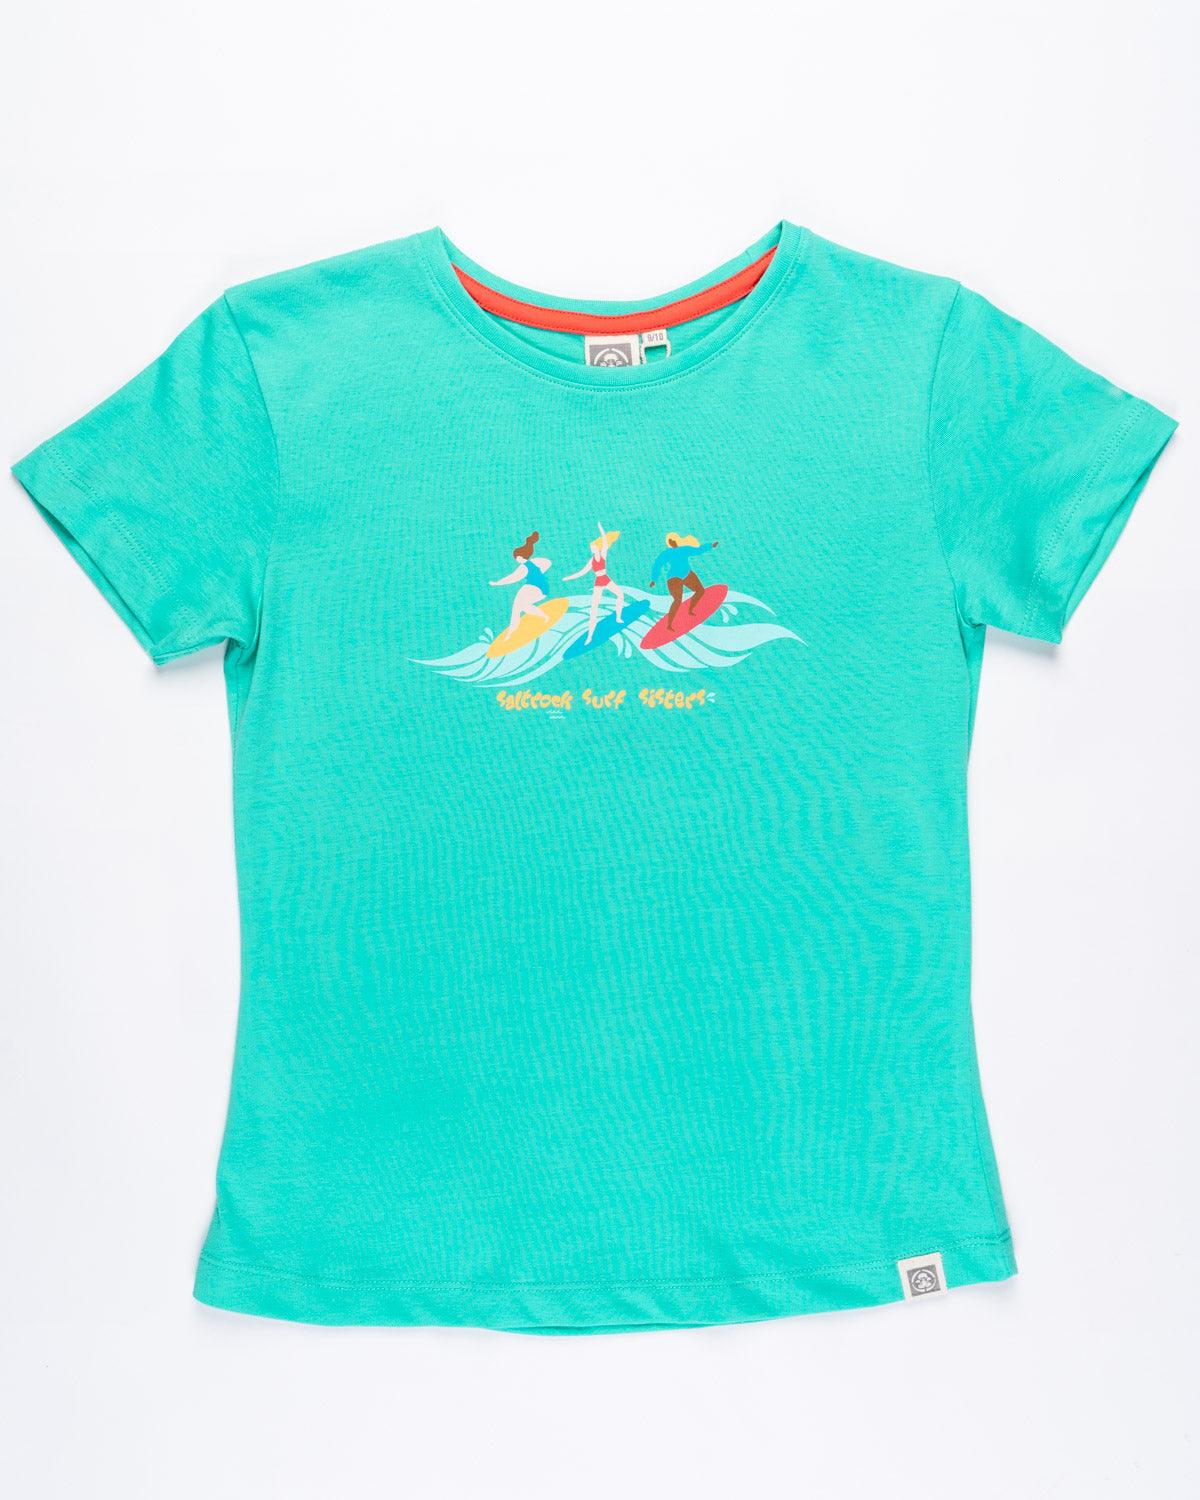 Party Wave - Girls Recycled Short Sleeve T-Shirt - Turquoise